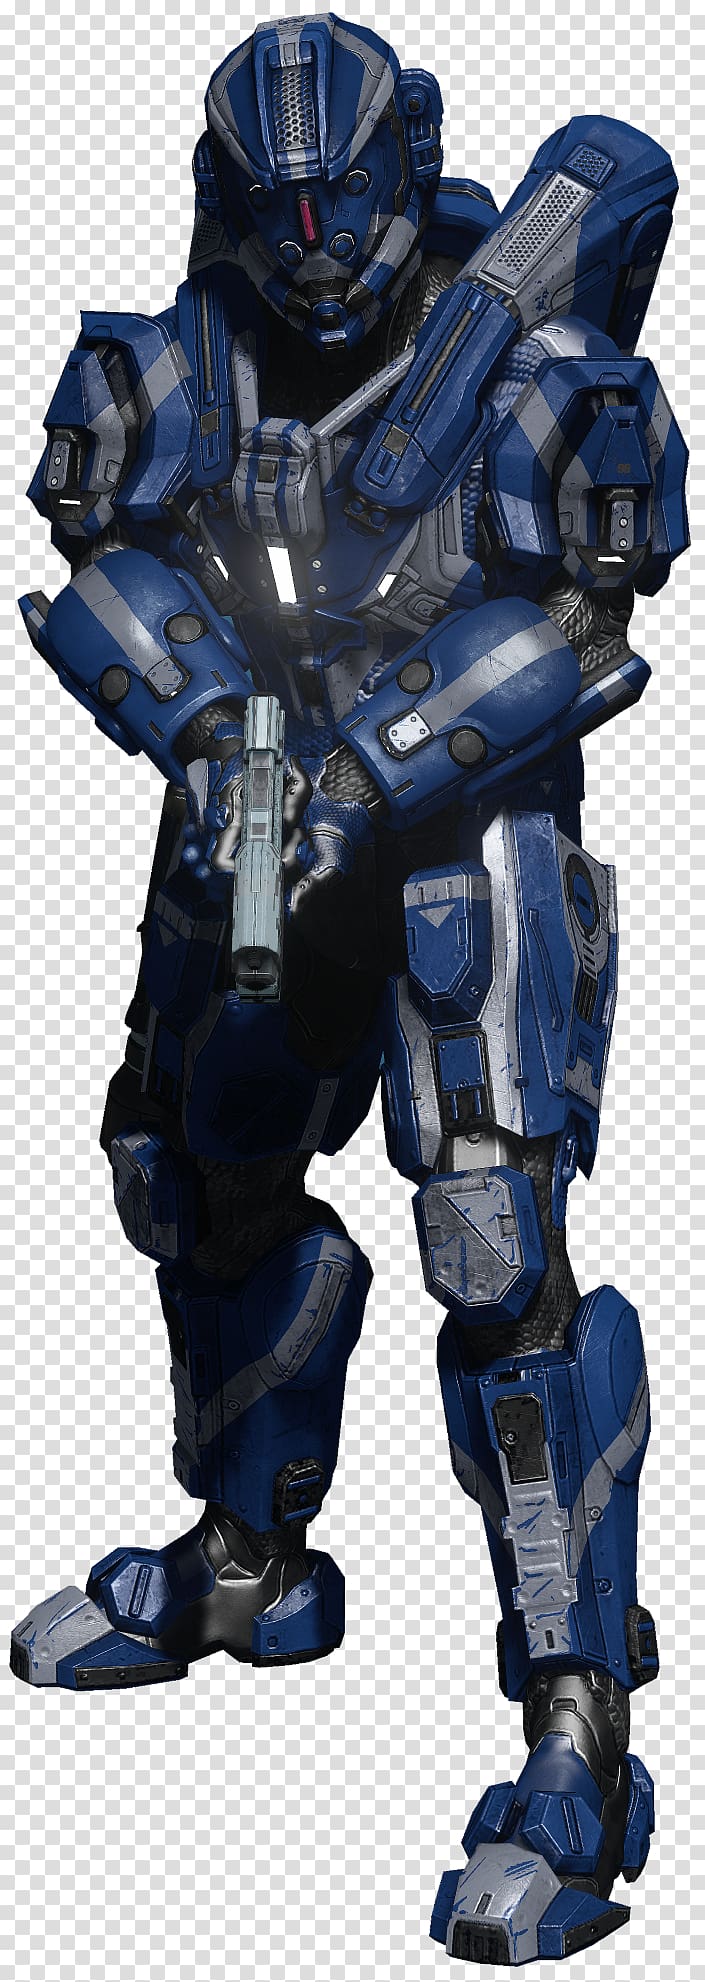 Halo 4 Halo 5 Guardians Video Game Mod Spartan Halo Transparent Background Png Clipart Hiclipart - halo spartan 117 armor roblox